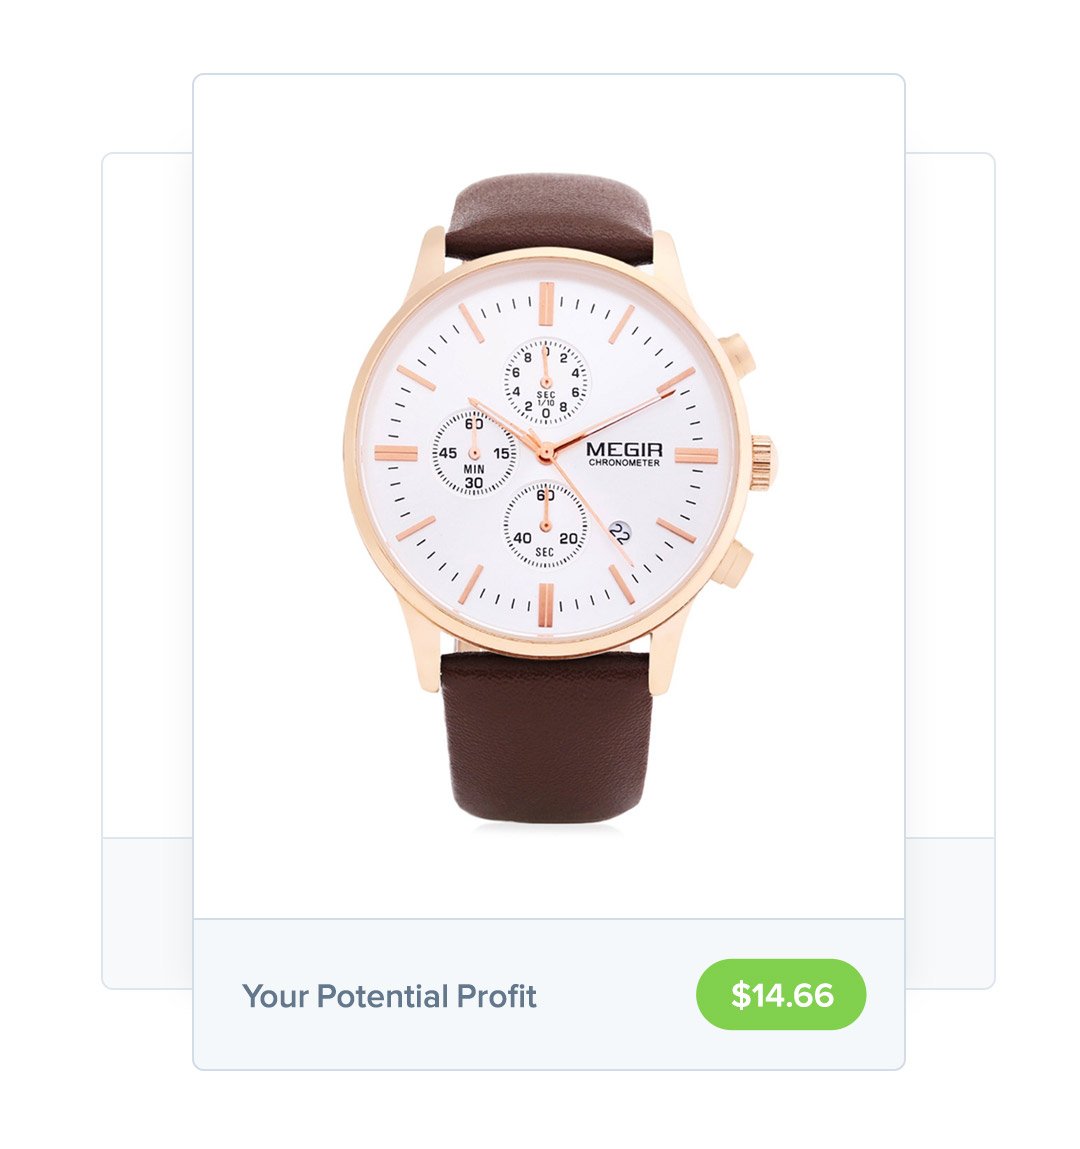 sell watches online